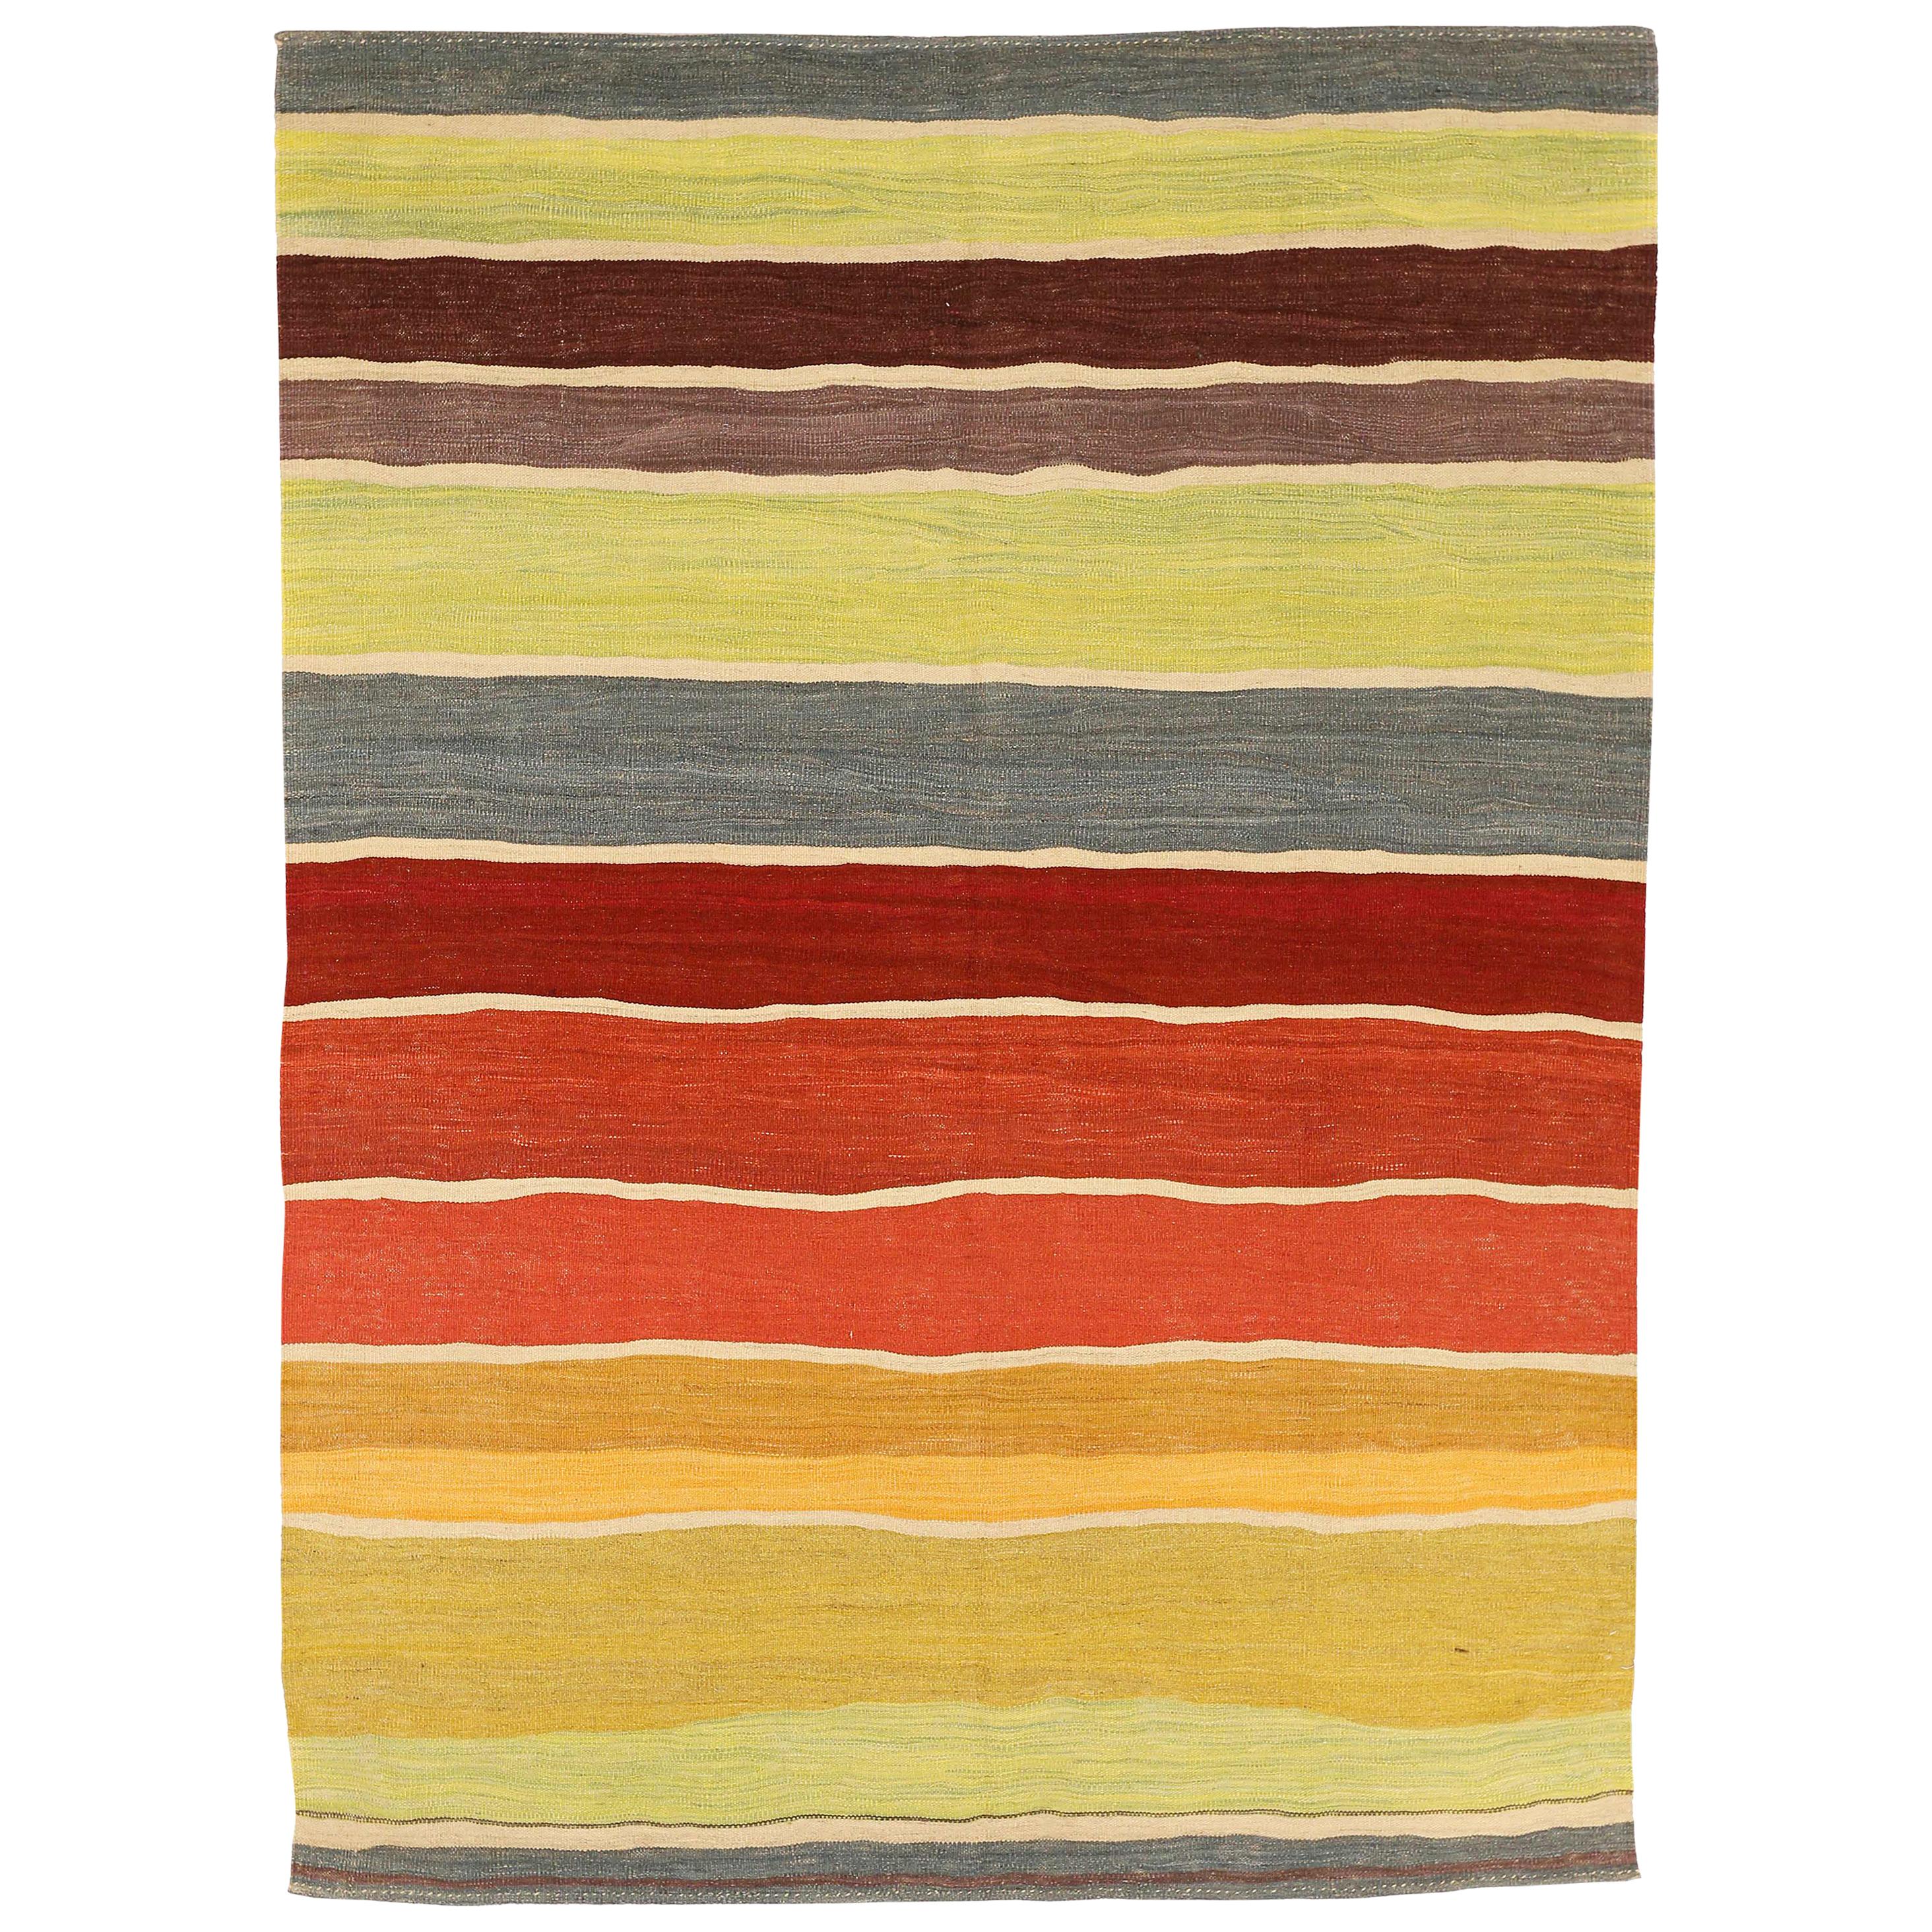 Modern Afghan Kilim Style Rug with Colored Stripes on Beige Field